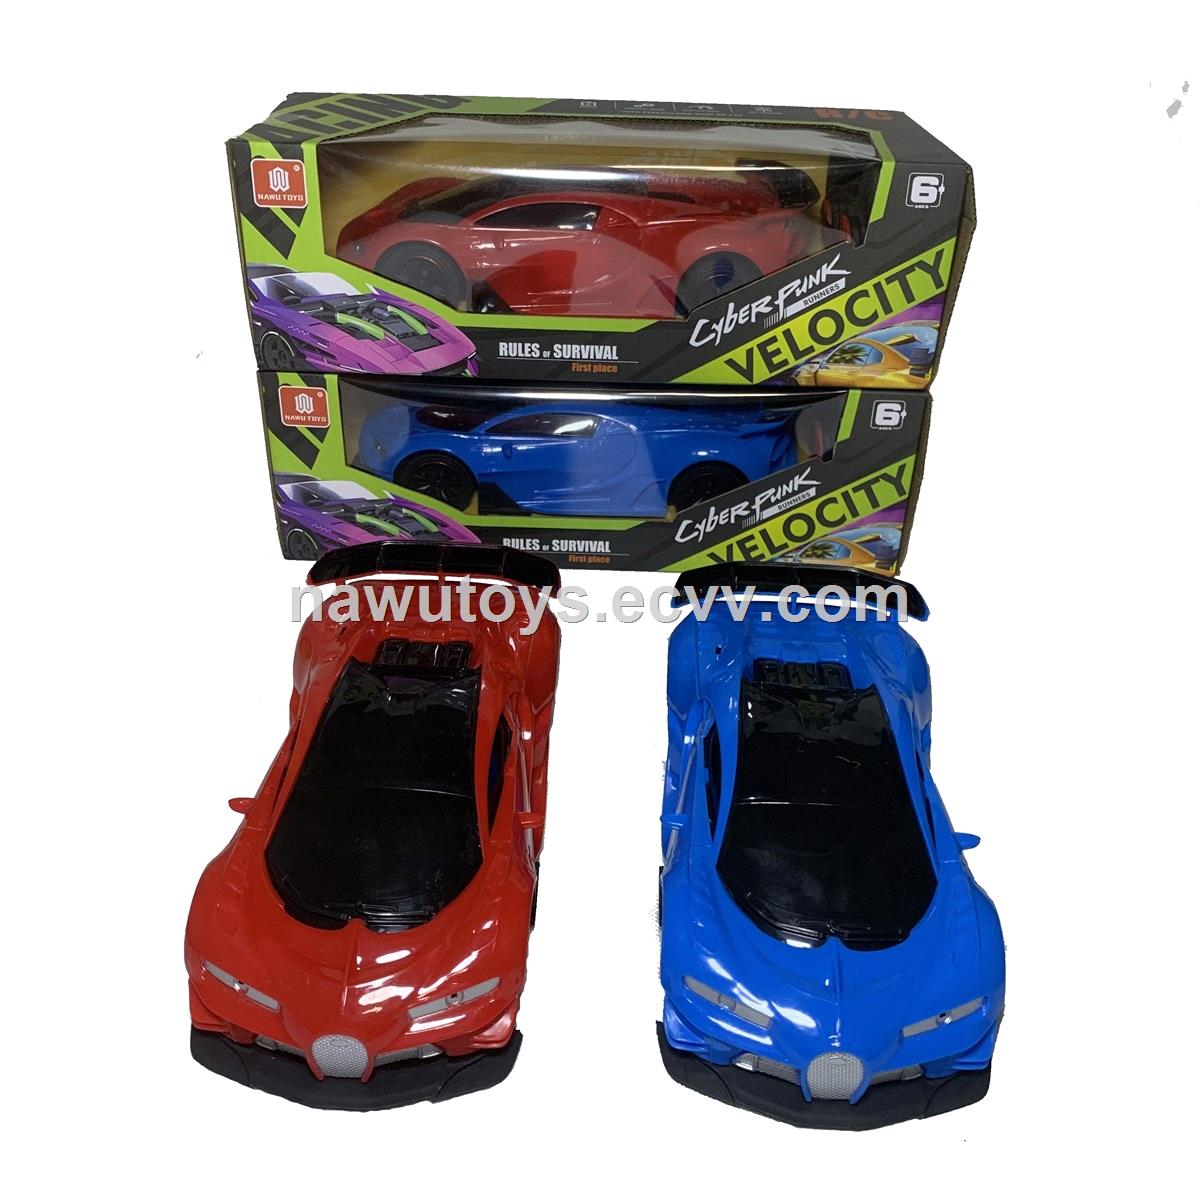 Nawu Toys 116 RC Racing Stimulated Cars Remote 24G 4 Channel Radio Control Vehicle Model